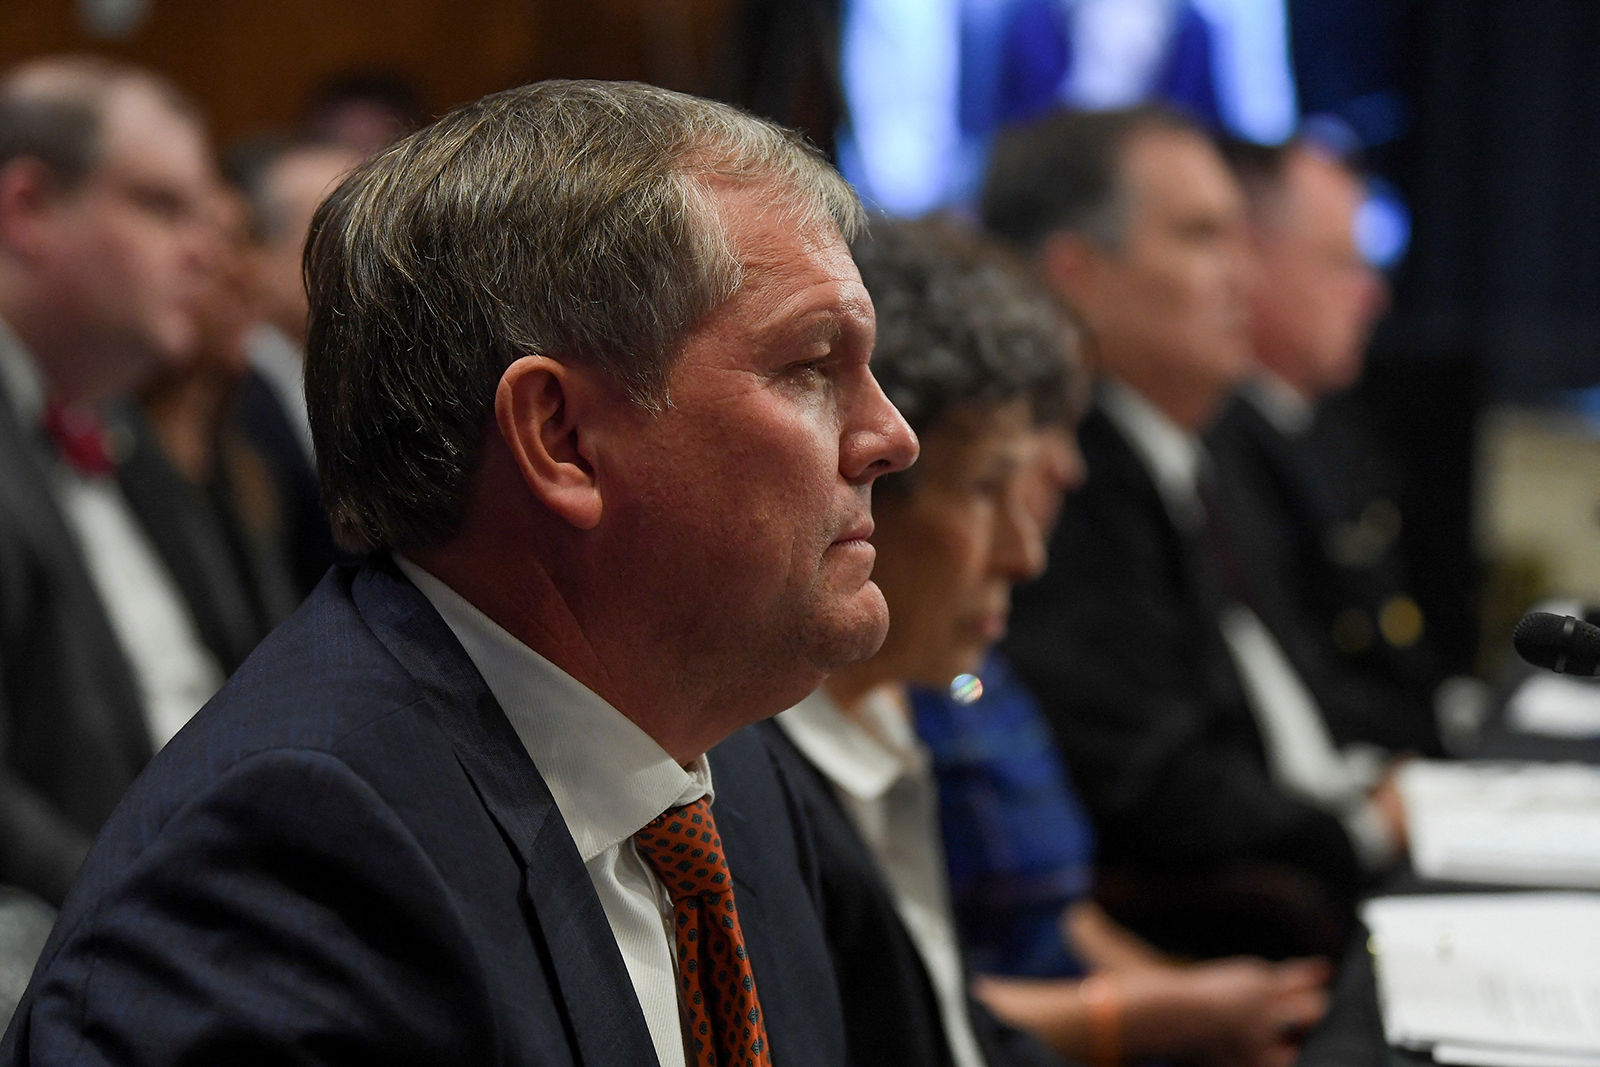 Norfolk Southern Chief Executive Alan Shaw testified on the East Palestine, Ohio train derailment before a U.S. Senate Environment and Public Works Committee hearing today on Capitol Hill.